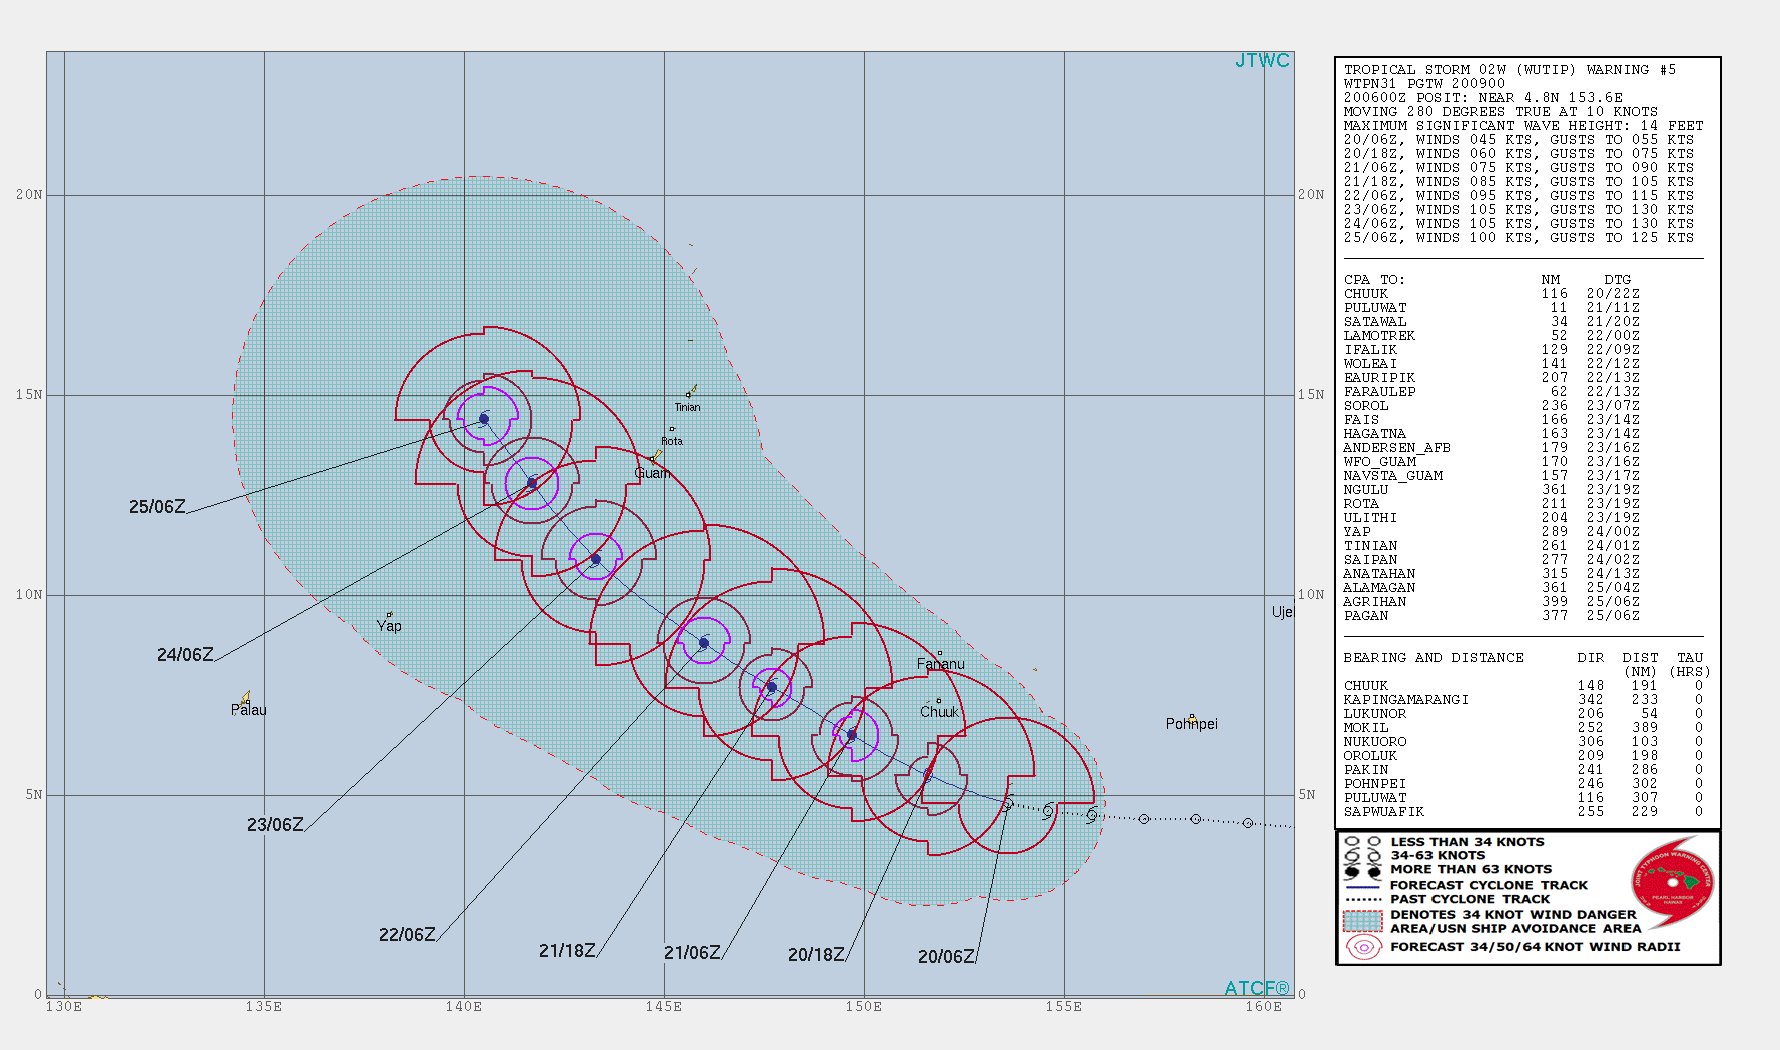 09UTC: WUTIP(02W) forecast to intensify rapidly to a CAT3 US in less than 3 days while approaching the Guam/Yap area